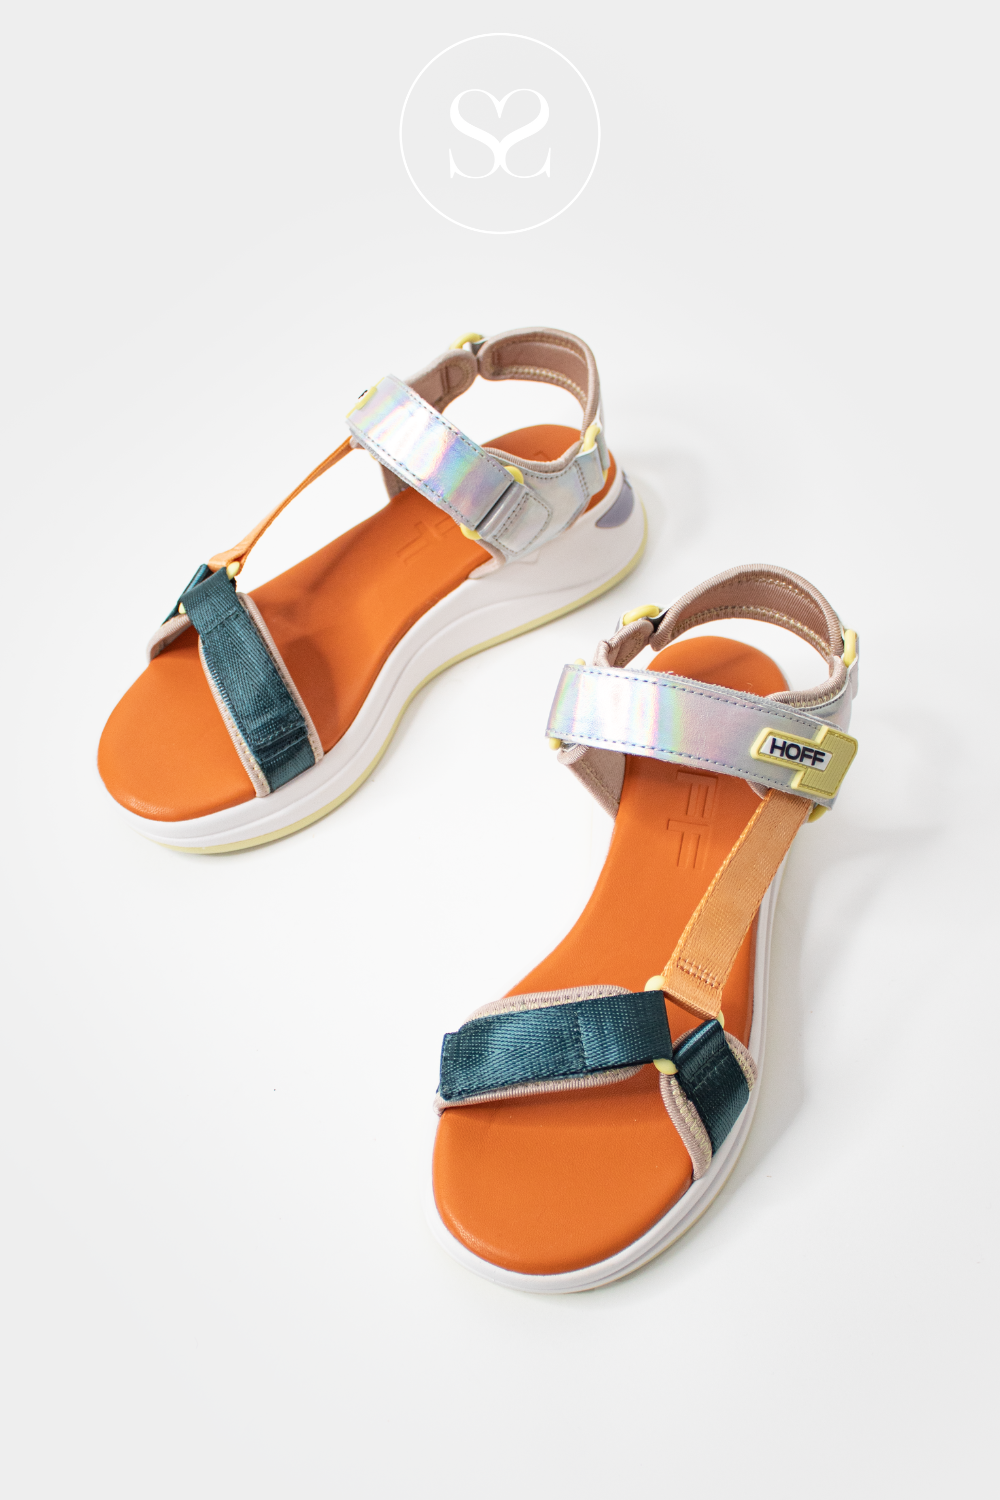 comfortable everyday sandals from women from Hoff. manui style